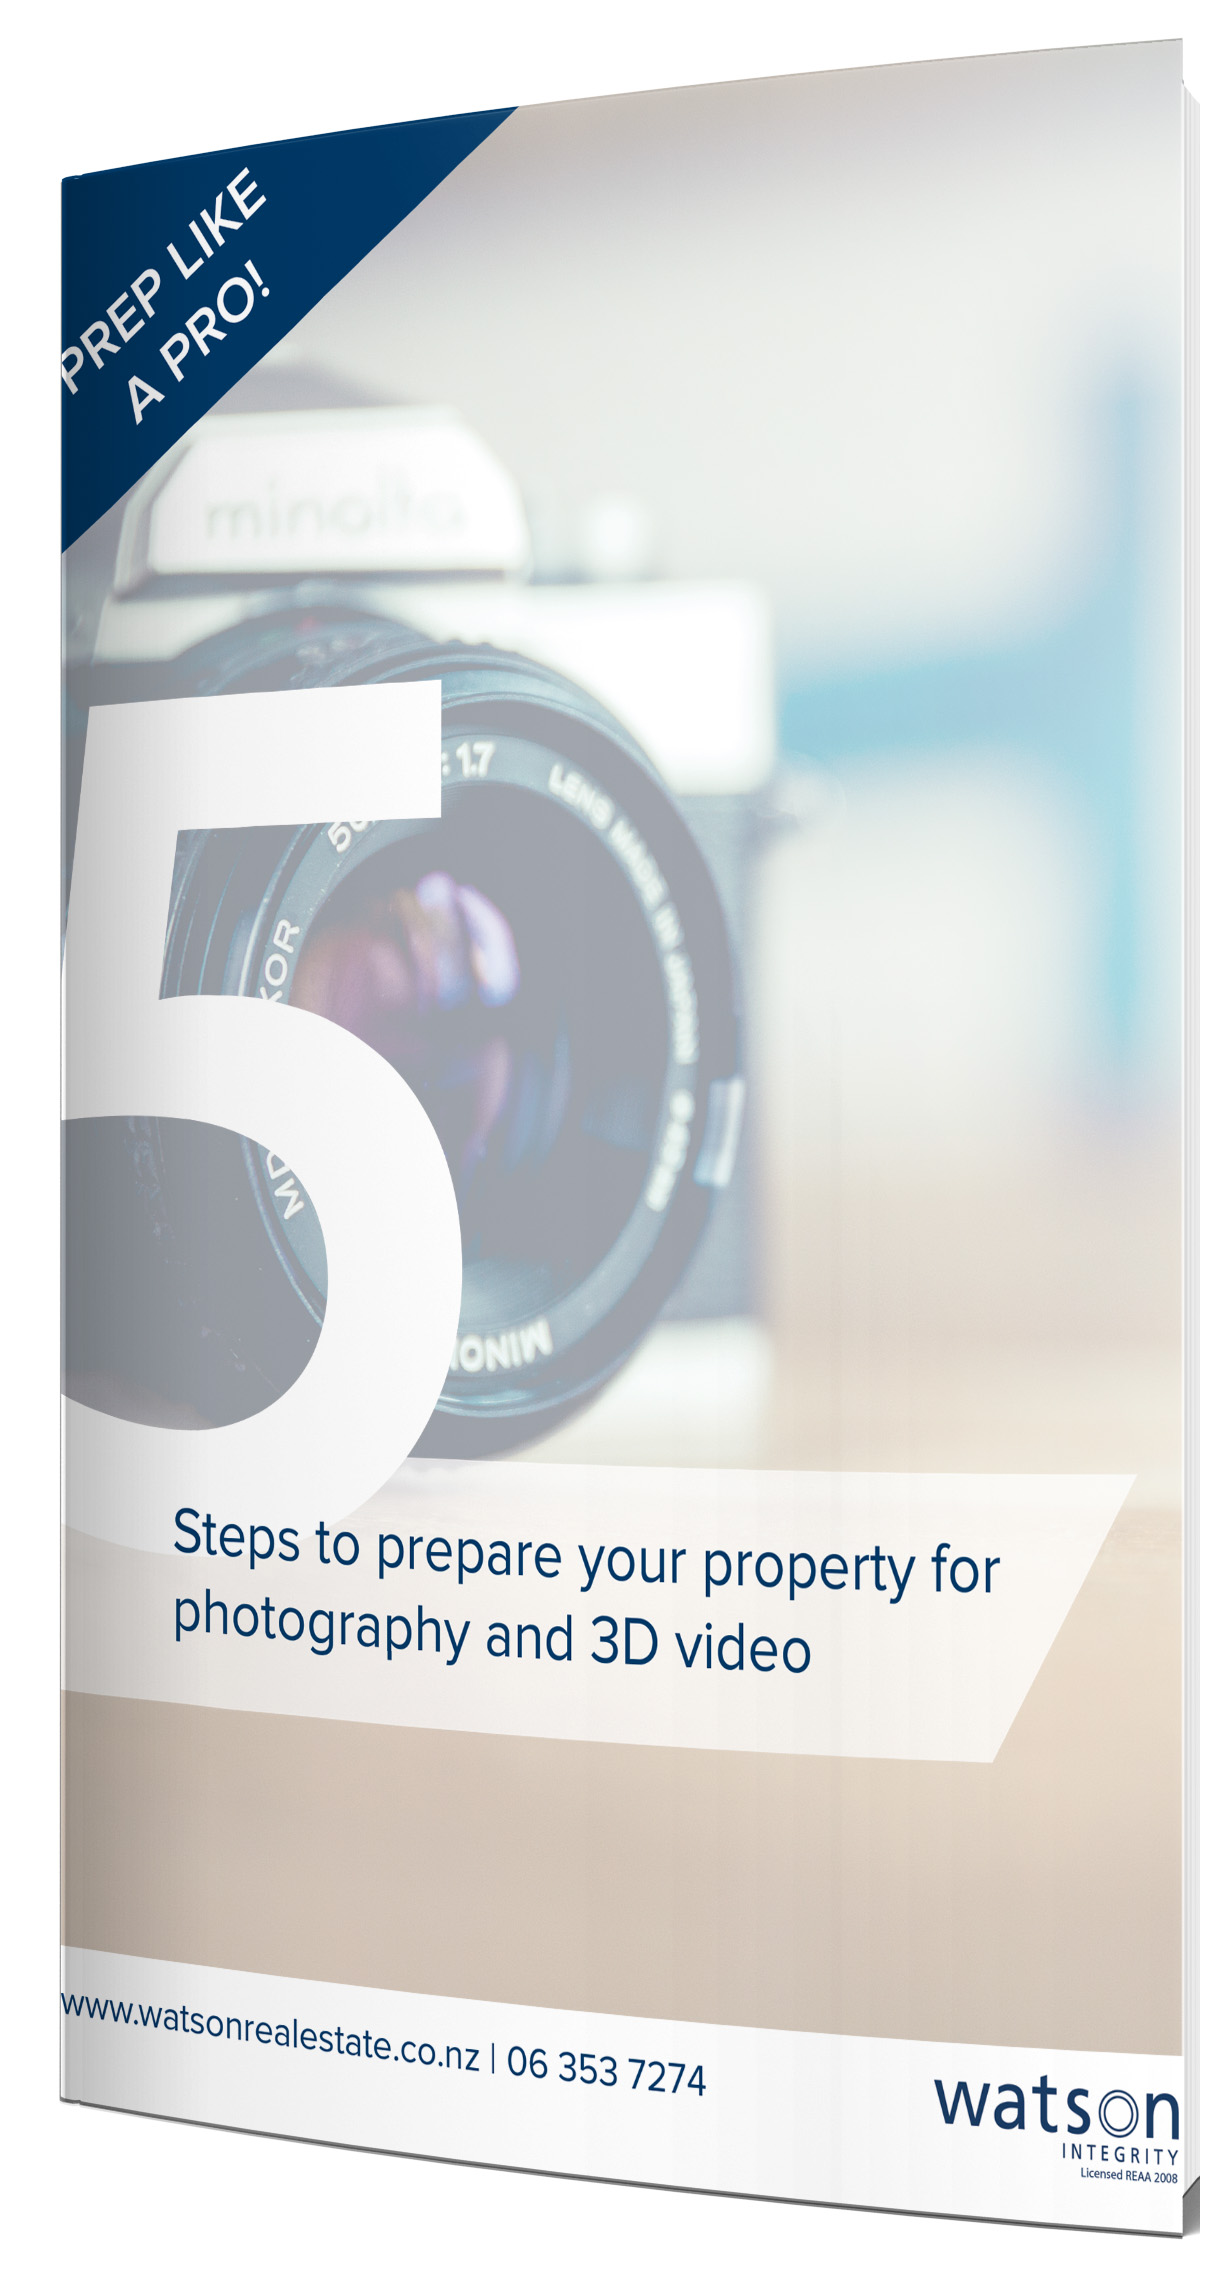 5 Steps to prepare your home for 3D video and photography